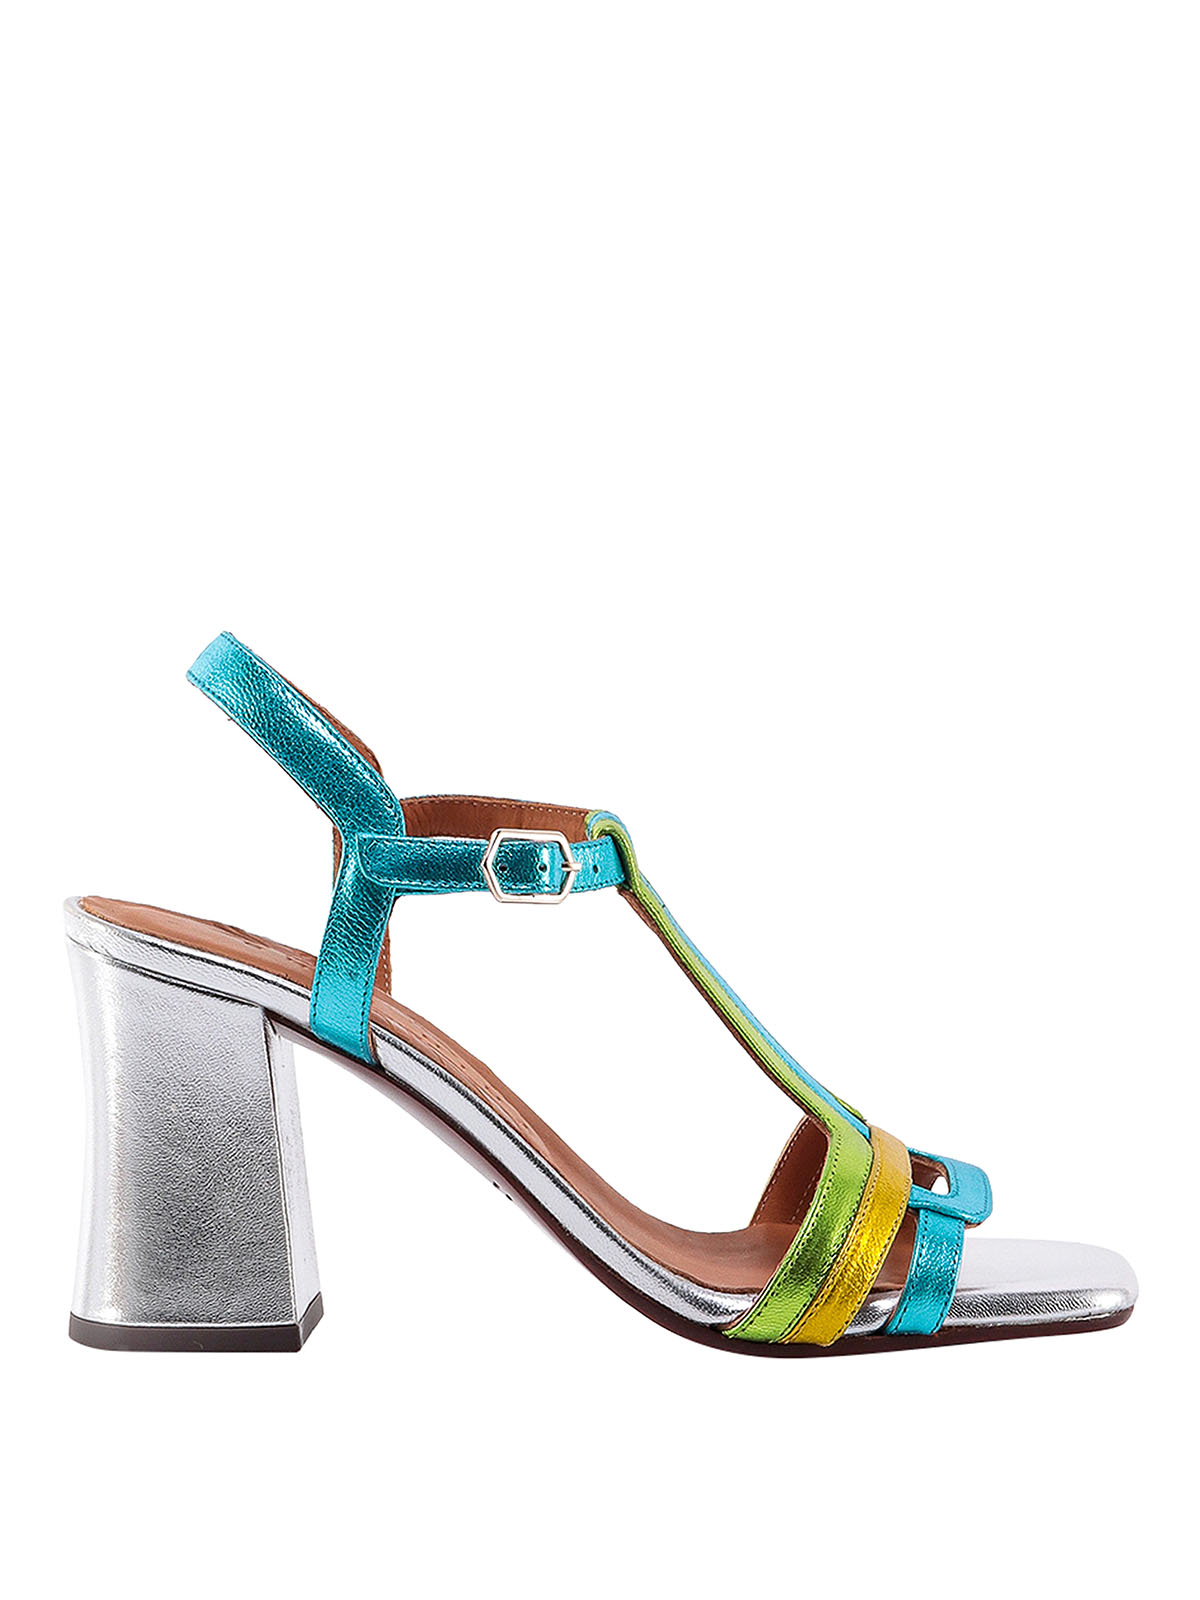 Chie Mihara Laminated Leather Sandals In Multicolour